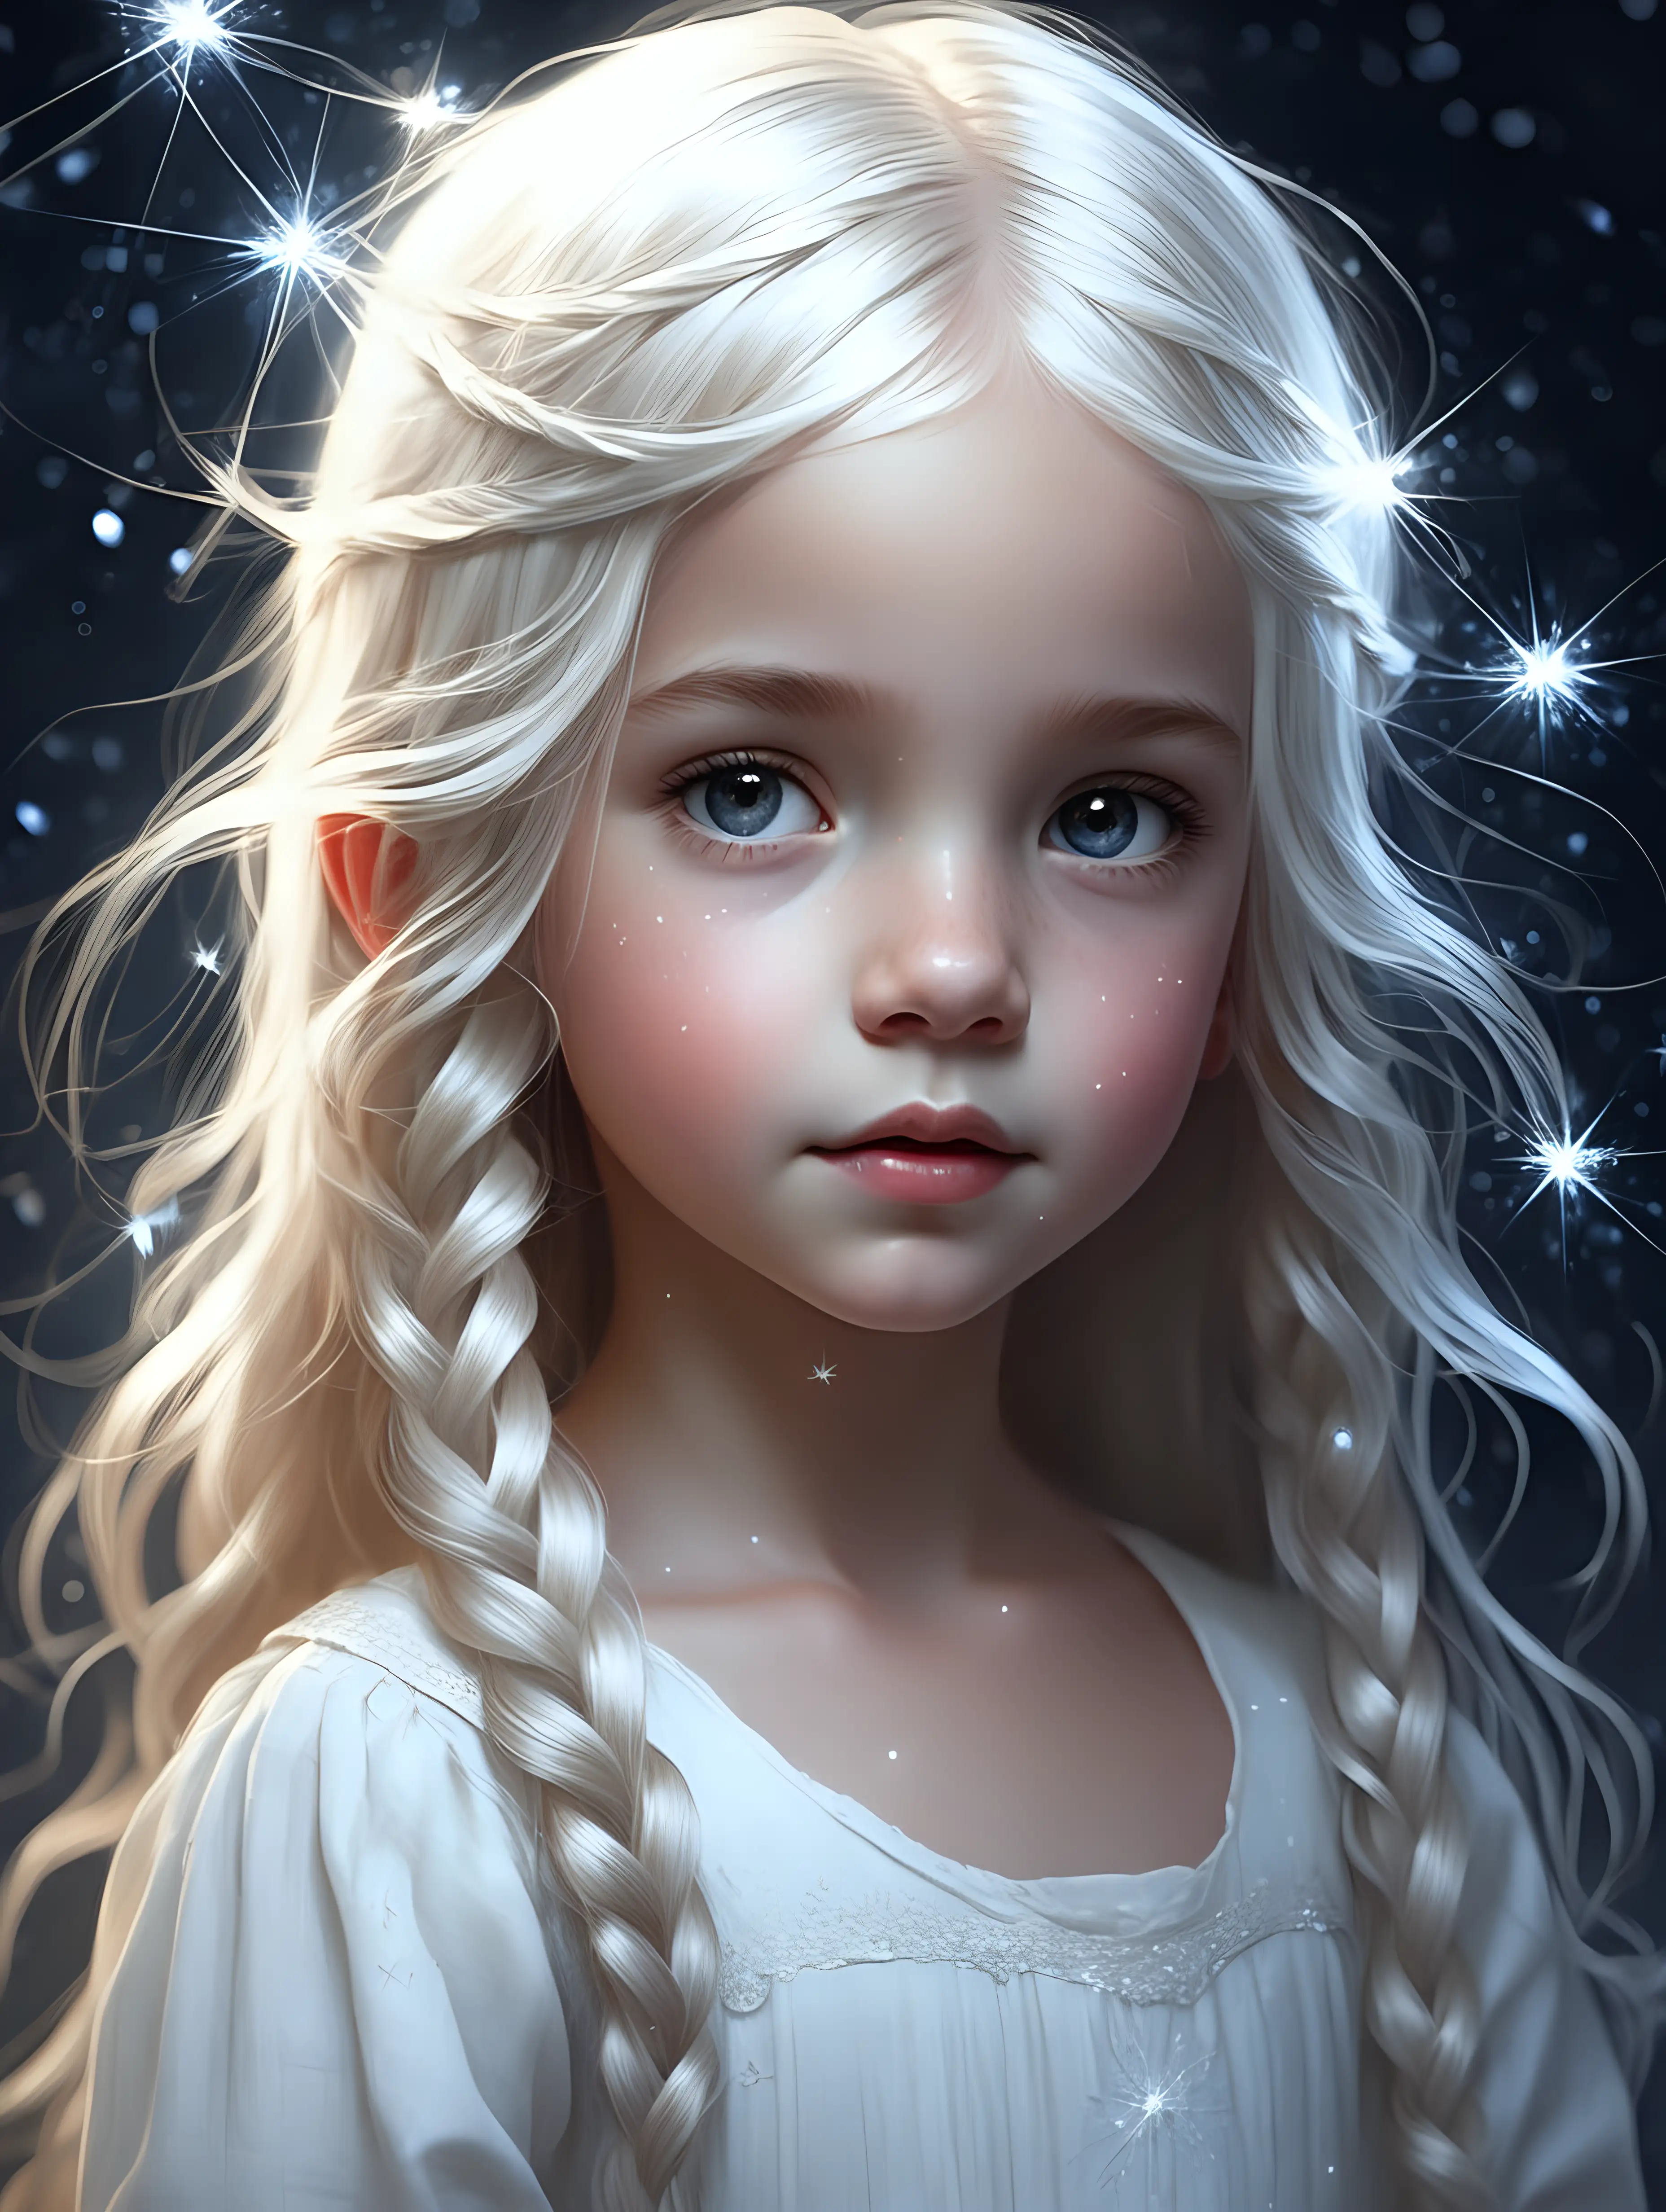 Her hair is Woven with sparkling starlight, pure and white.  Annie May, a little girls face, A Pixel Weaver, leaving her trace. “-v6”